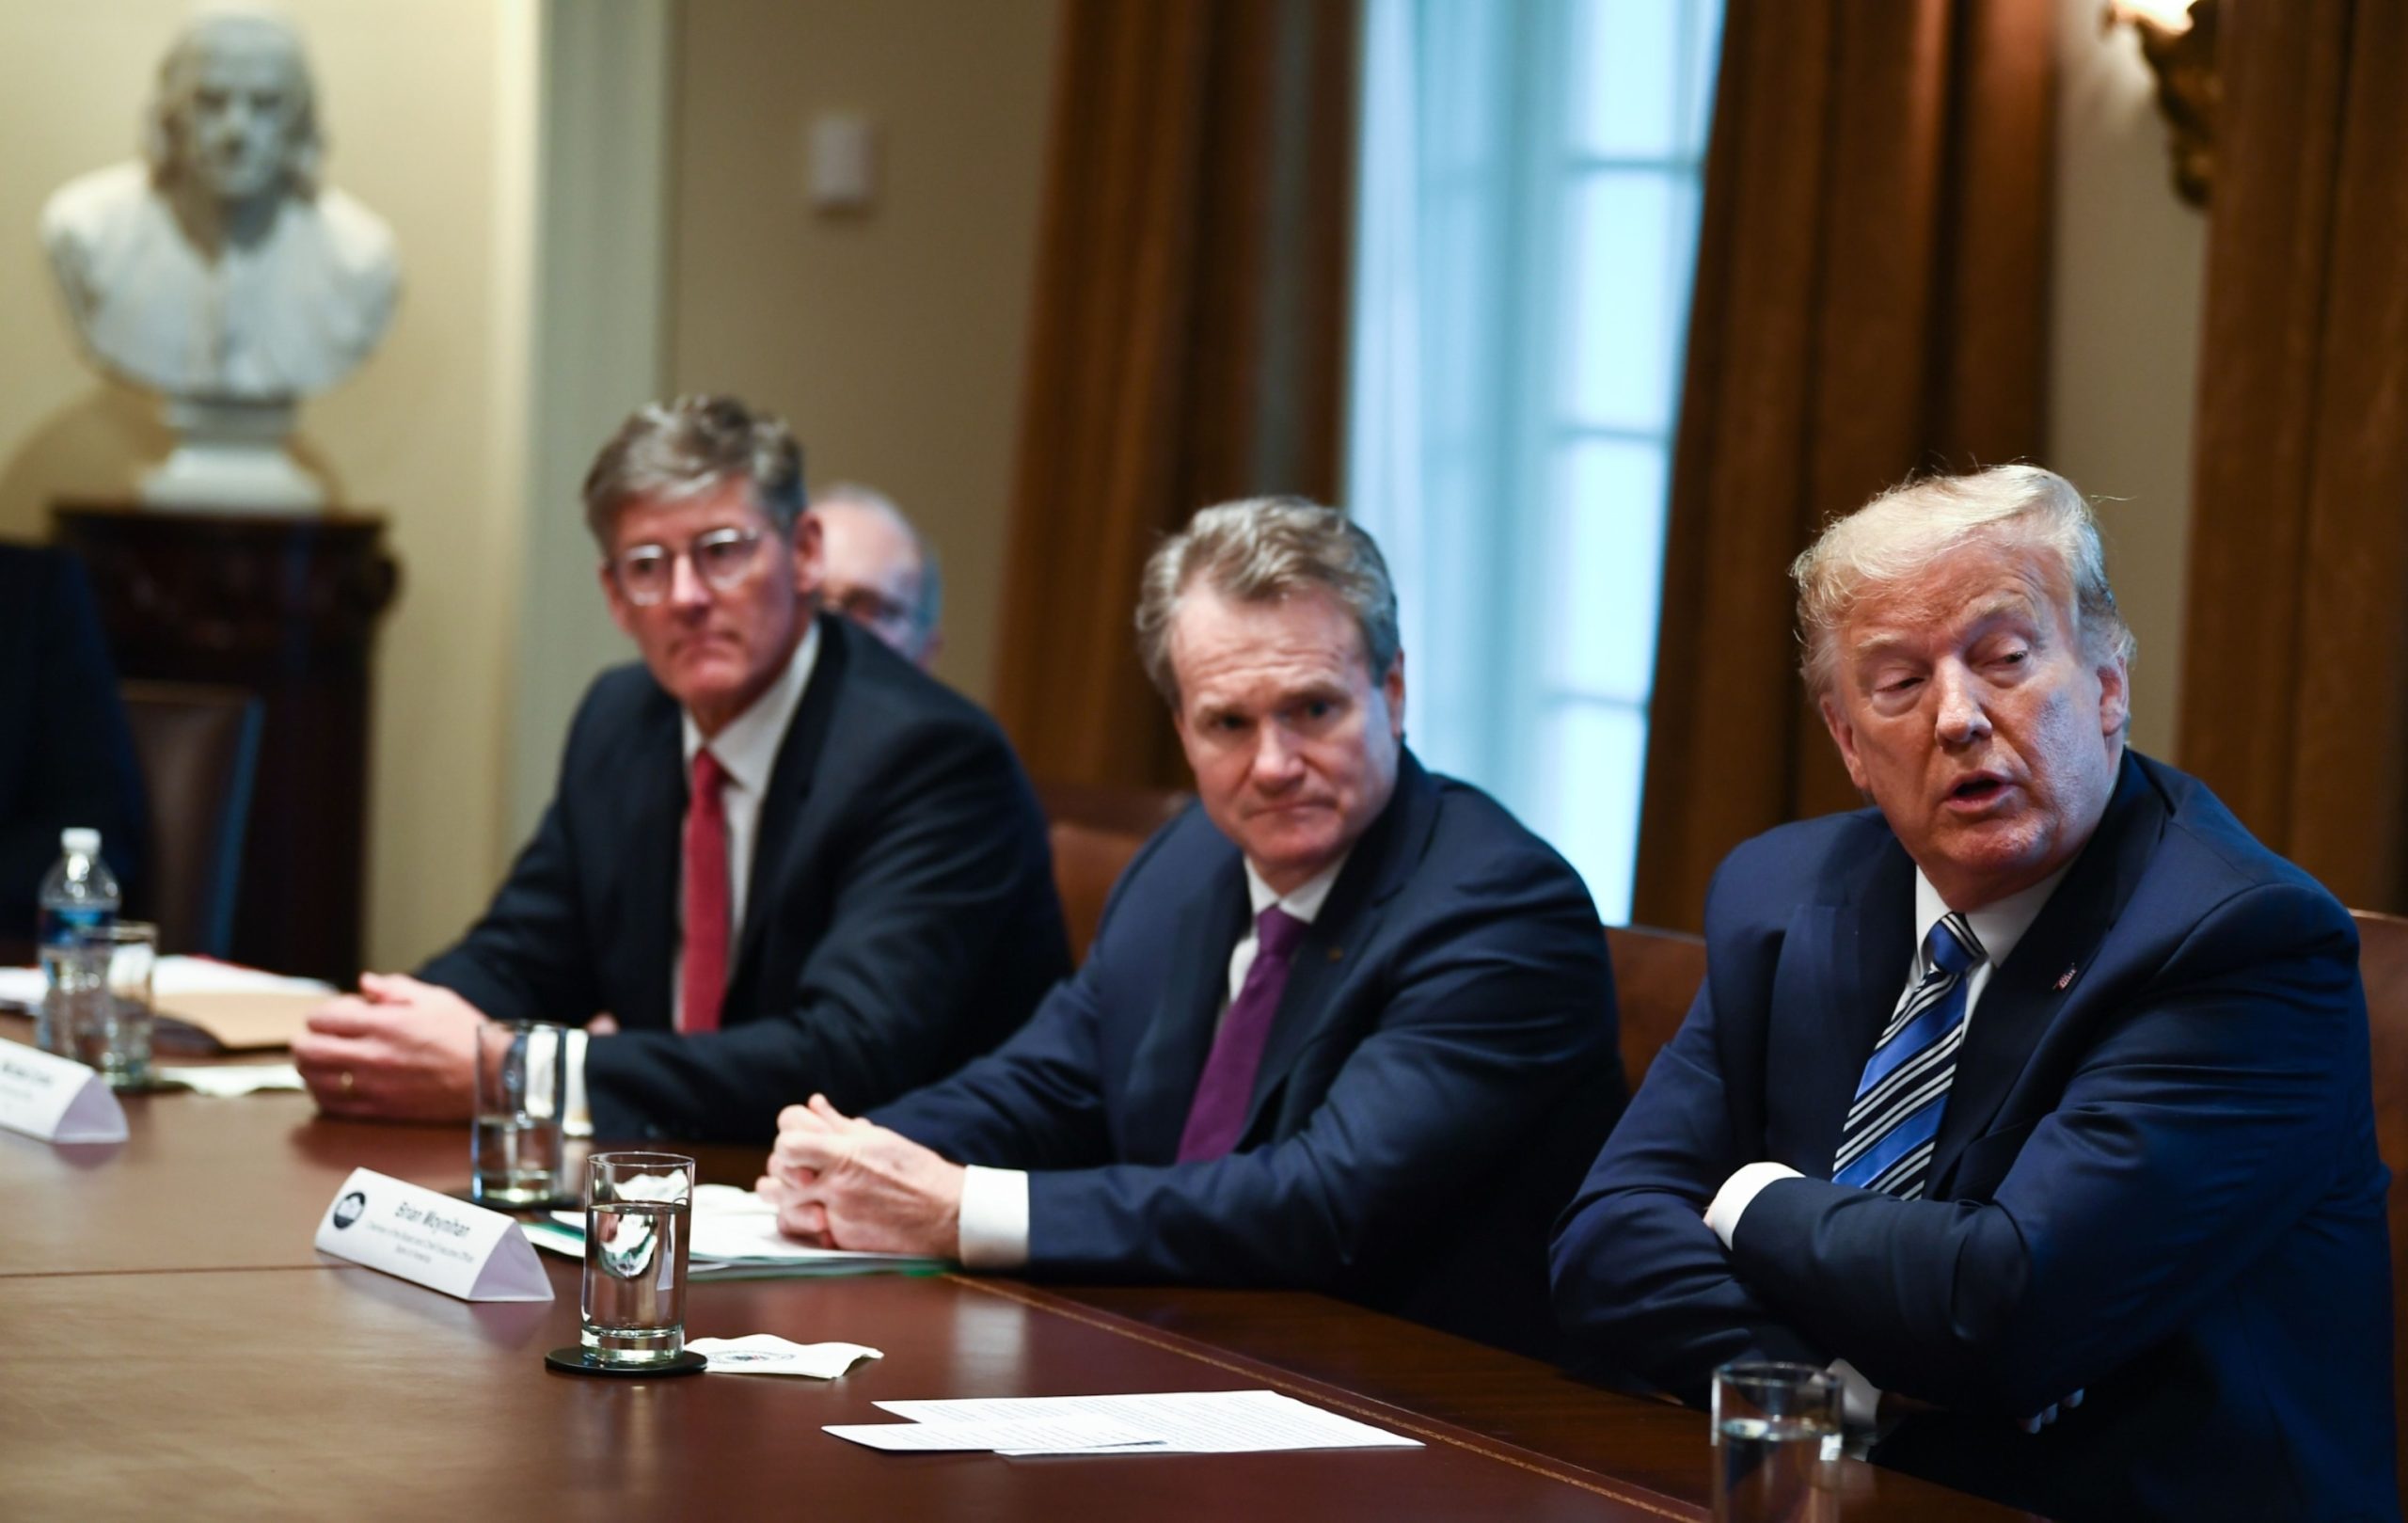 Some CEOs who initially opposed Trump's 2020 election lies are now showing signs of softening their stance